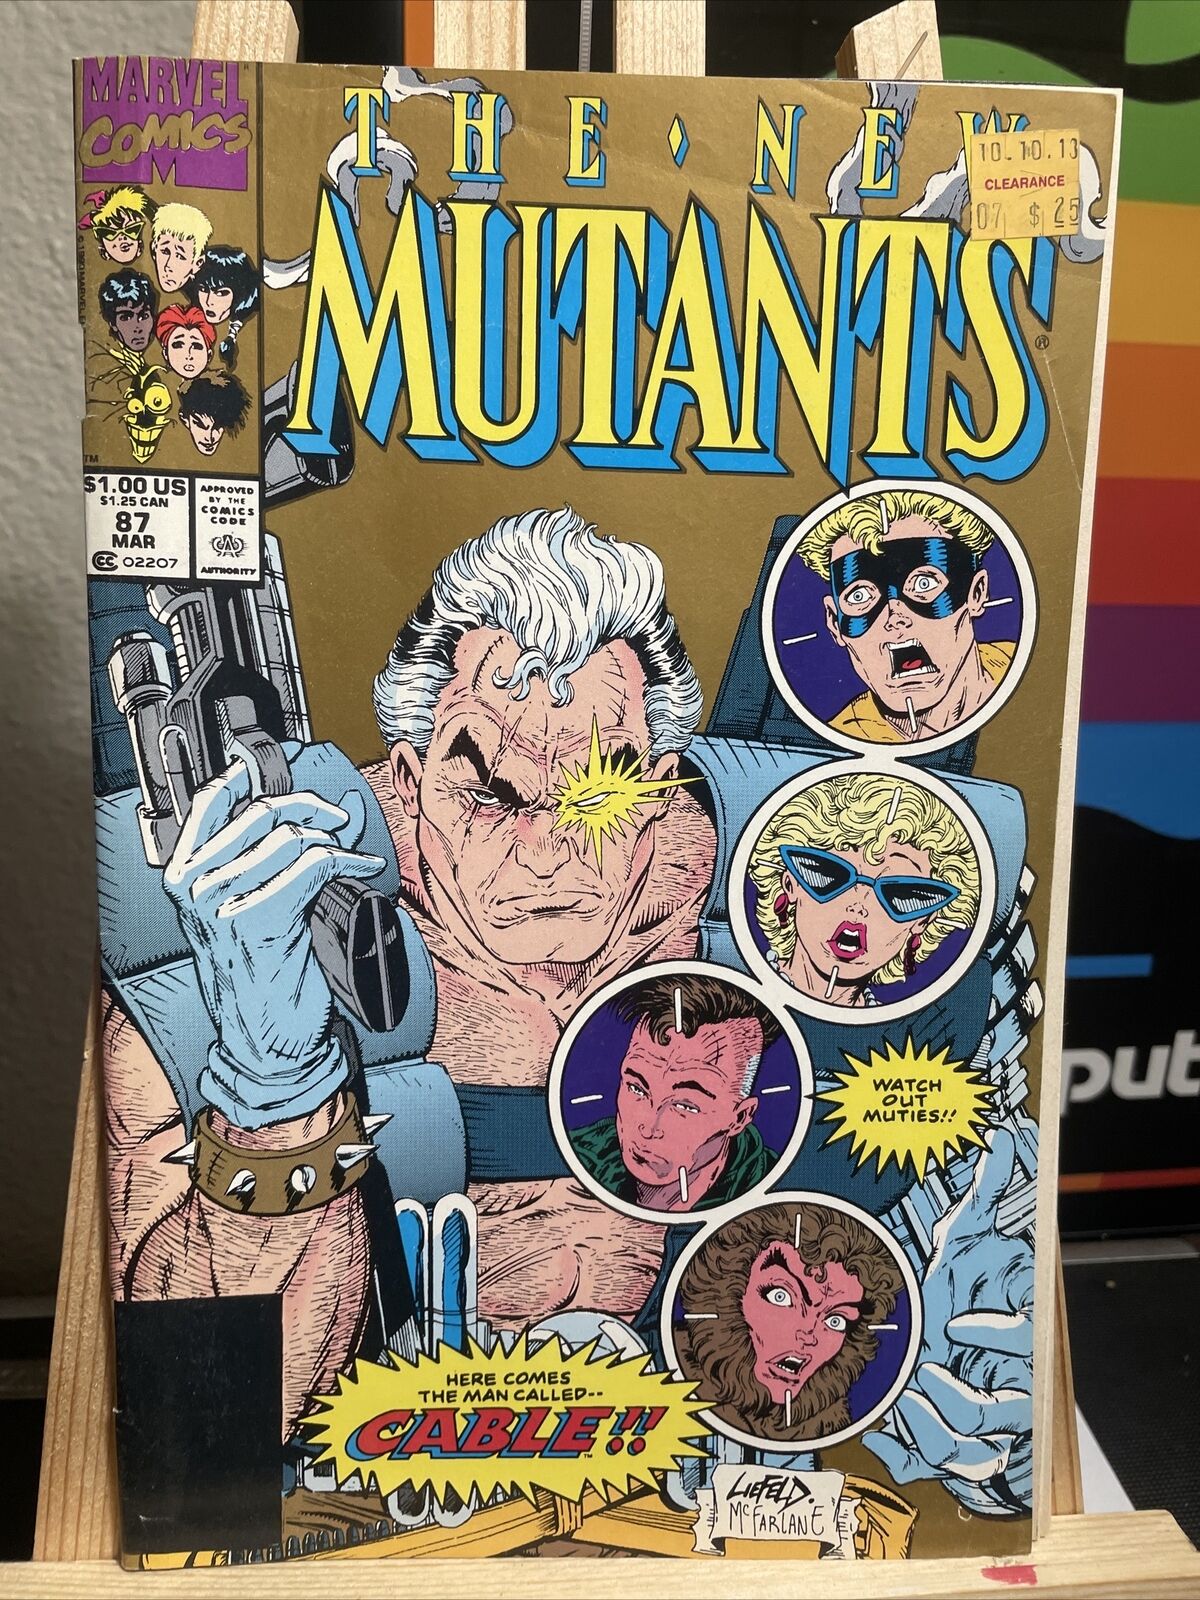 The New Mutants #87 (Marvel, March 1990)